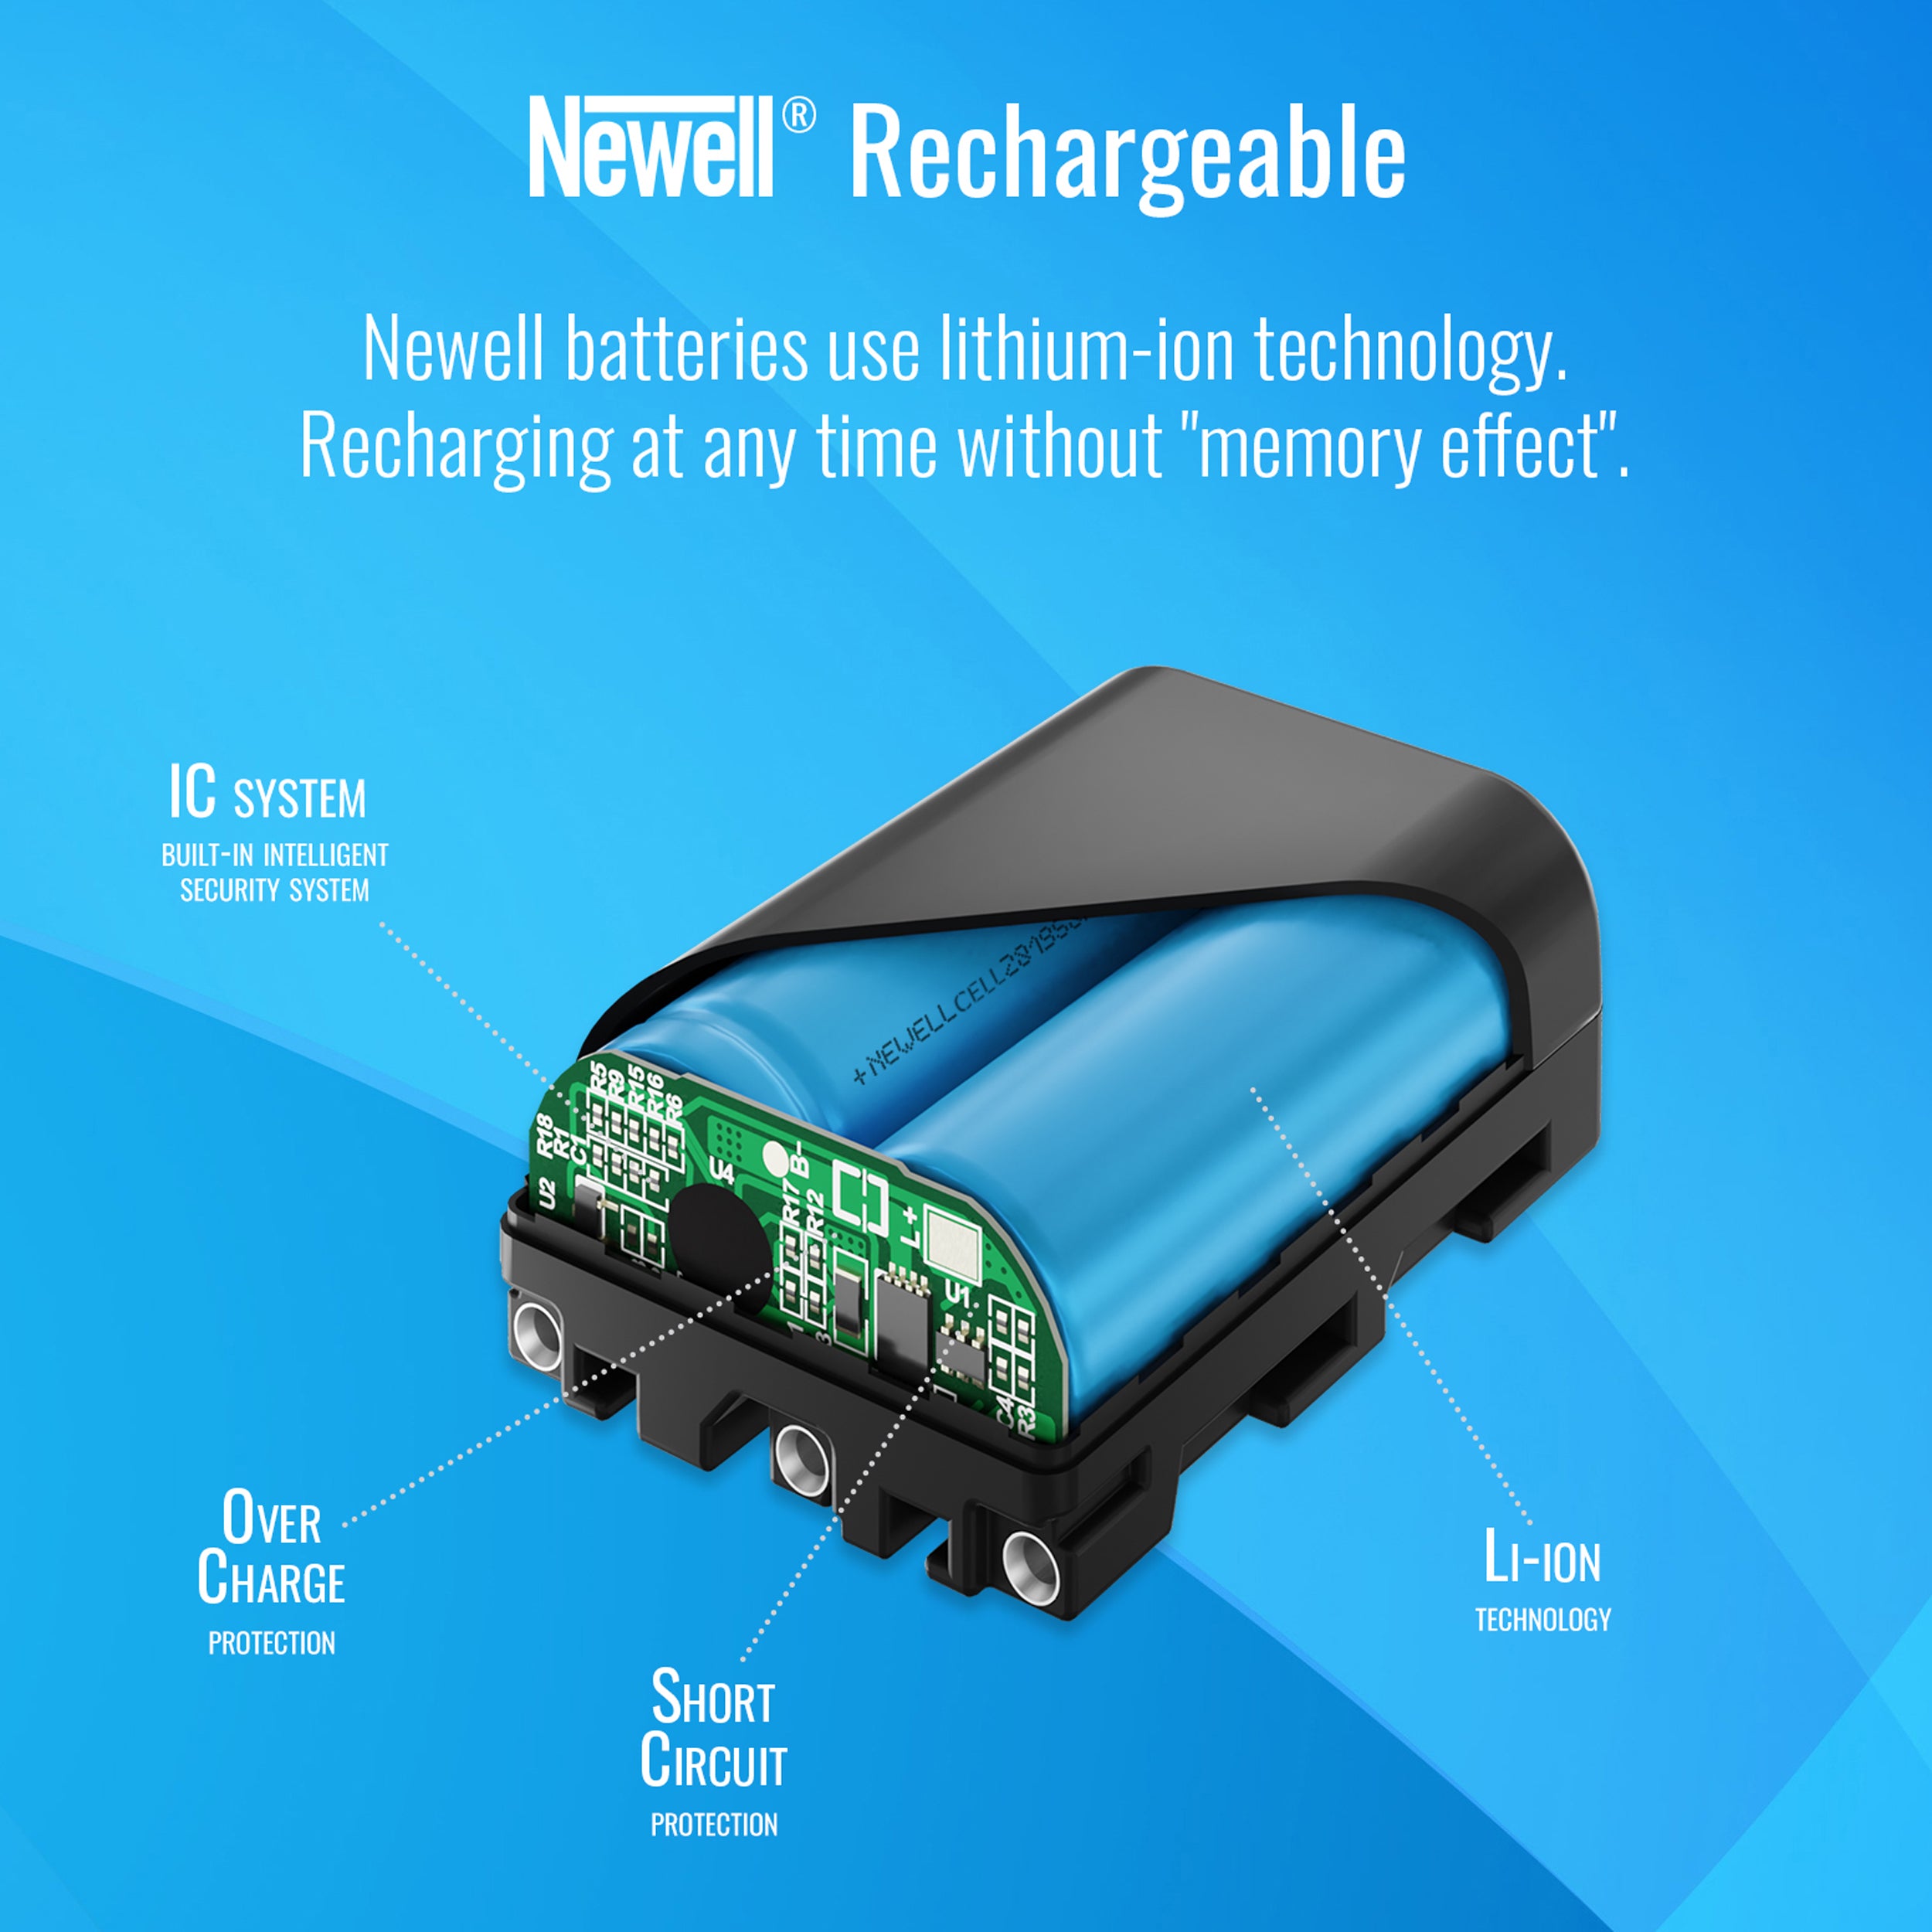 Batterie Newell PLUS NP-BX1